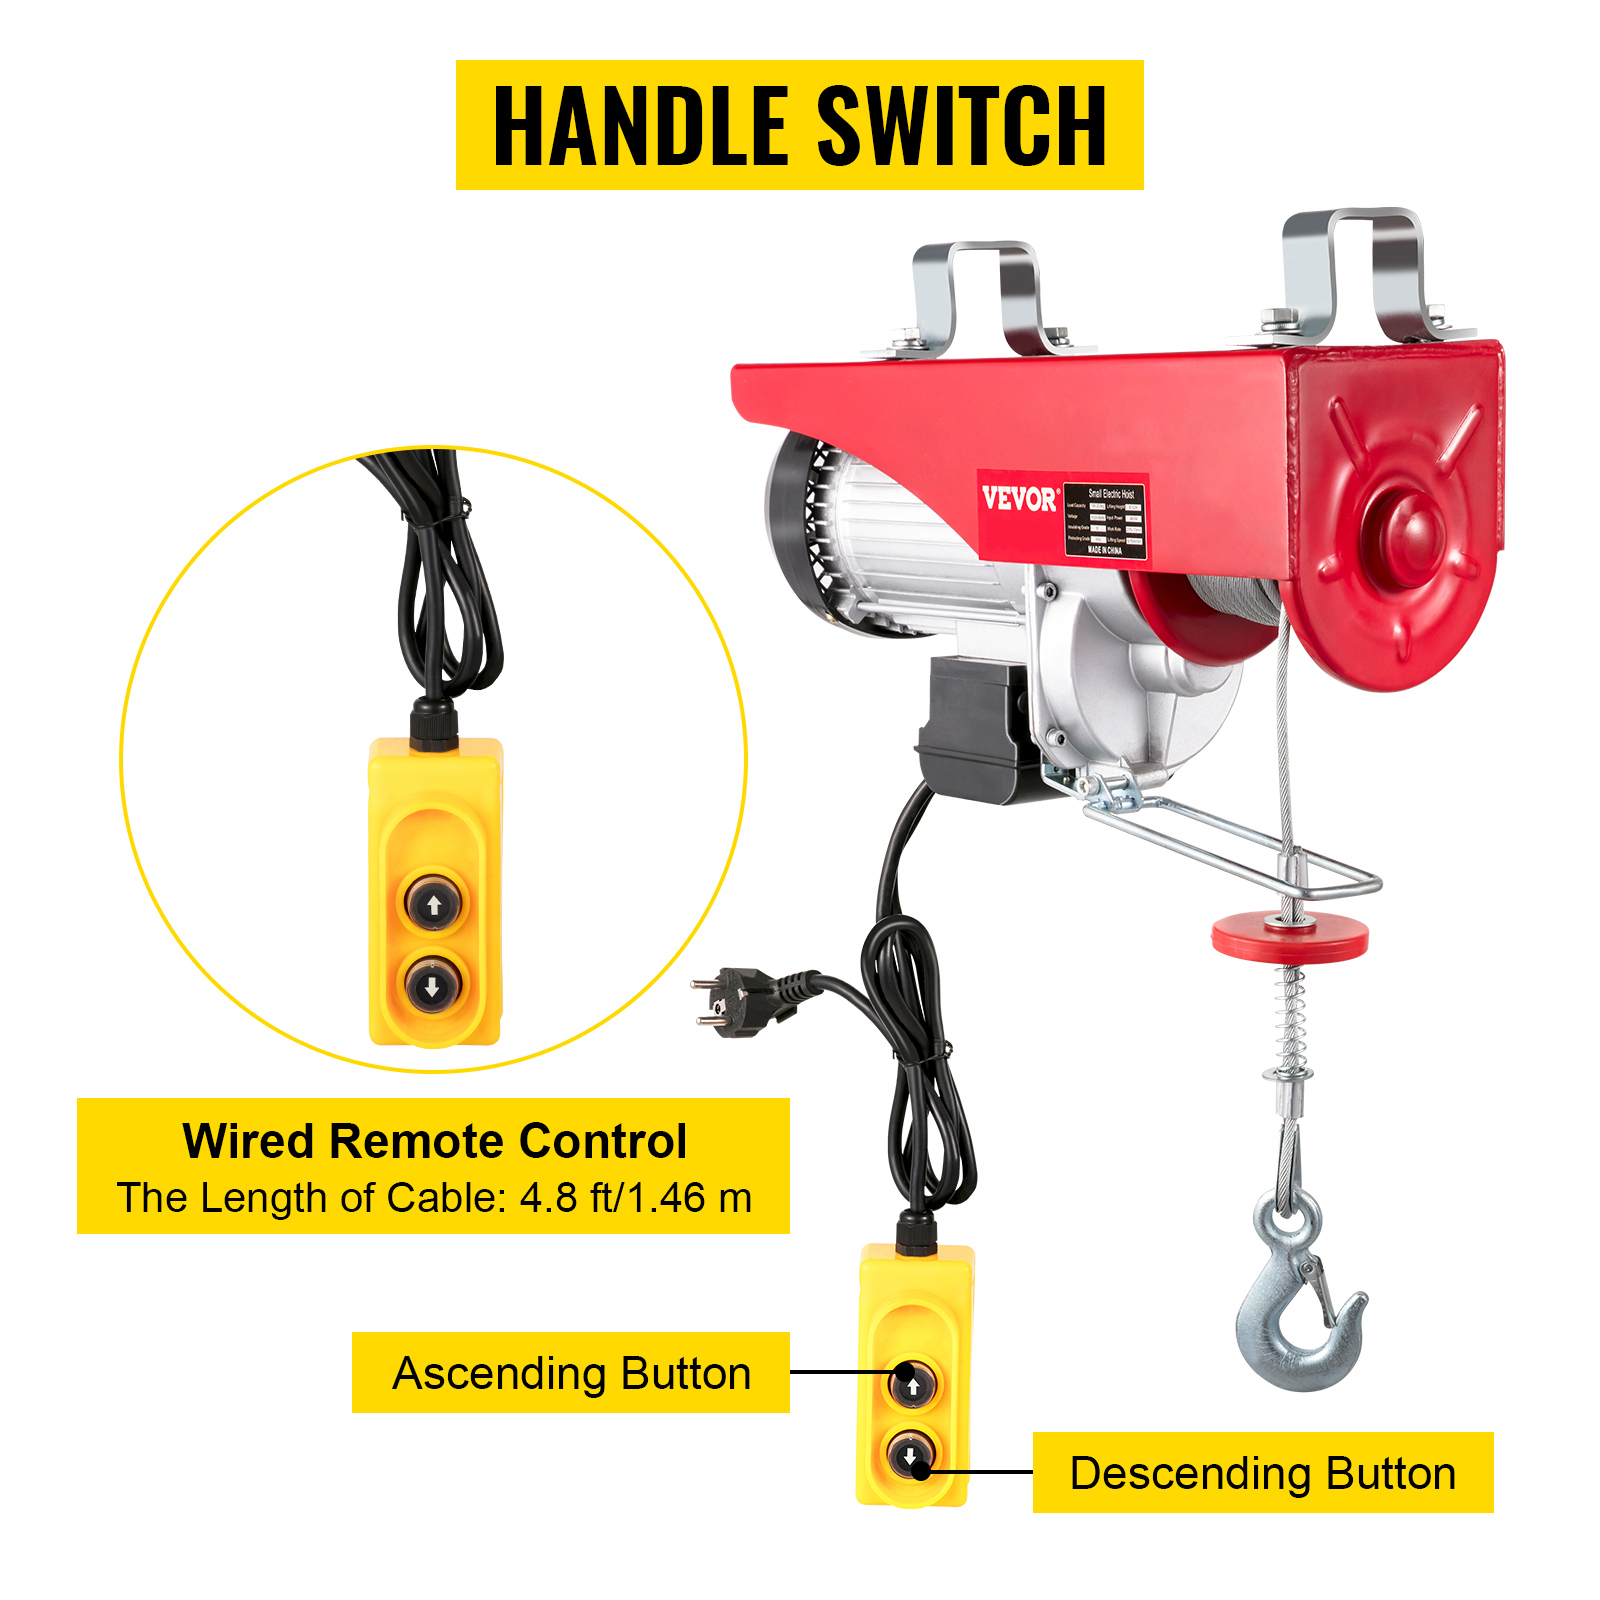 440-1760lbs Electric Cable Winch Lifting Hoist Crane w/ 39ft Rope 850W-1450W 